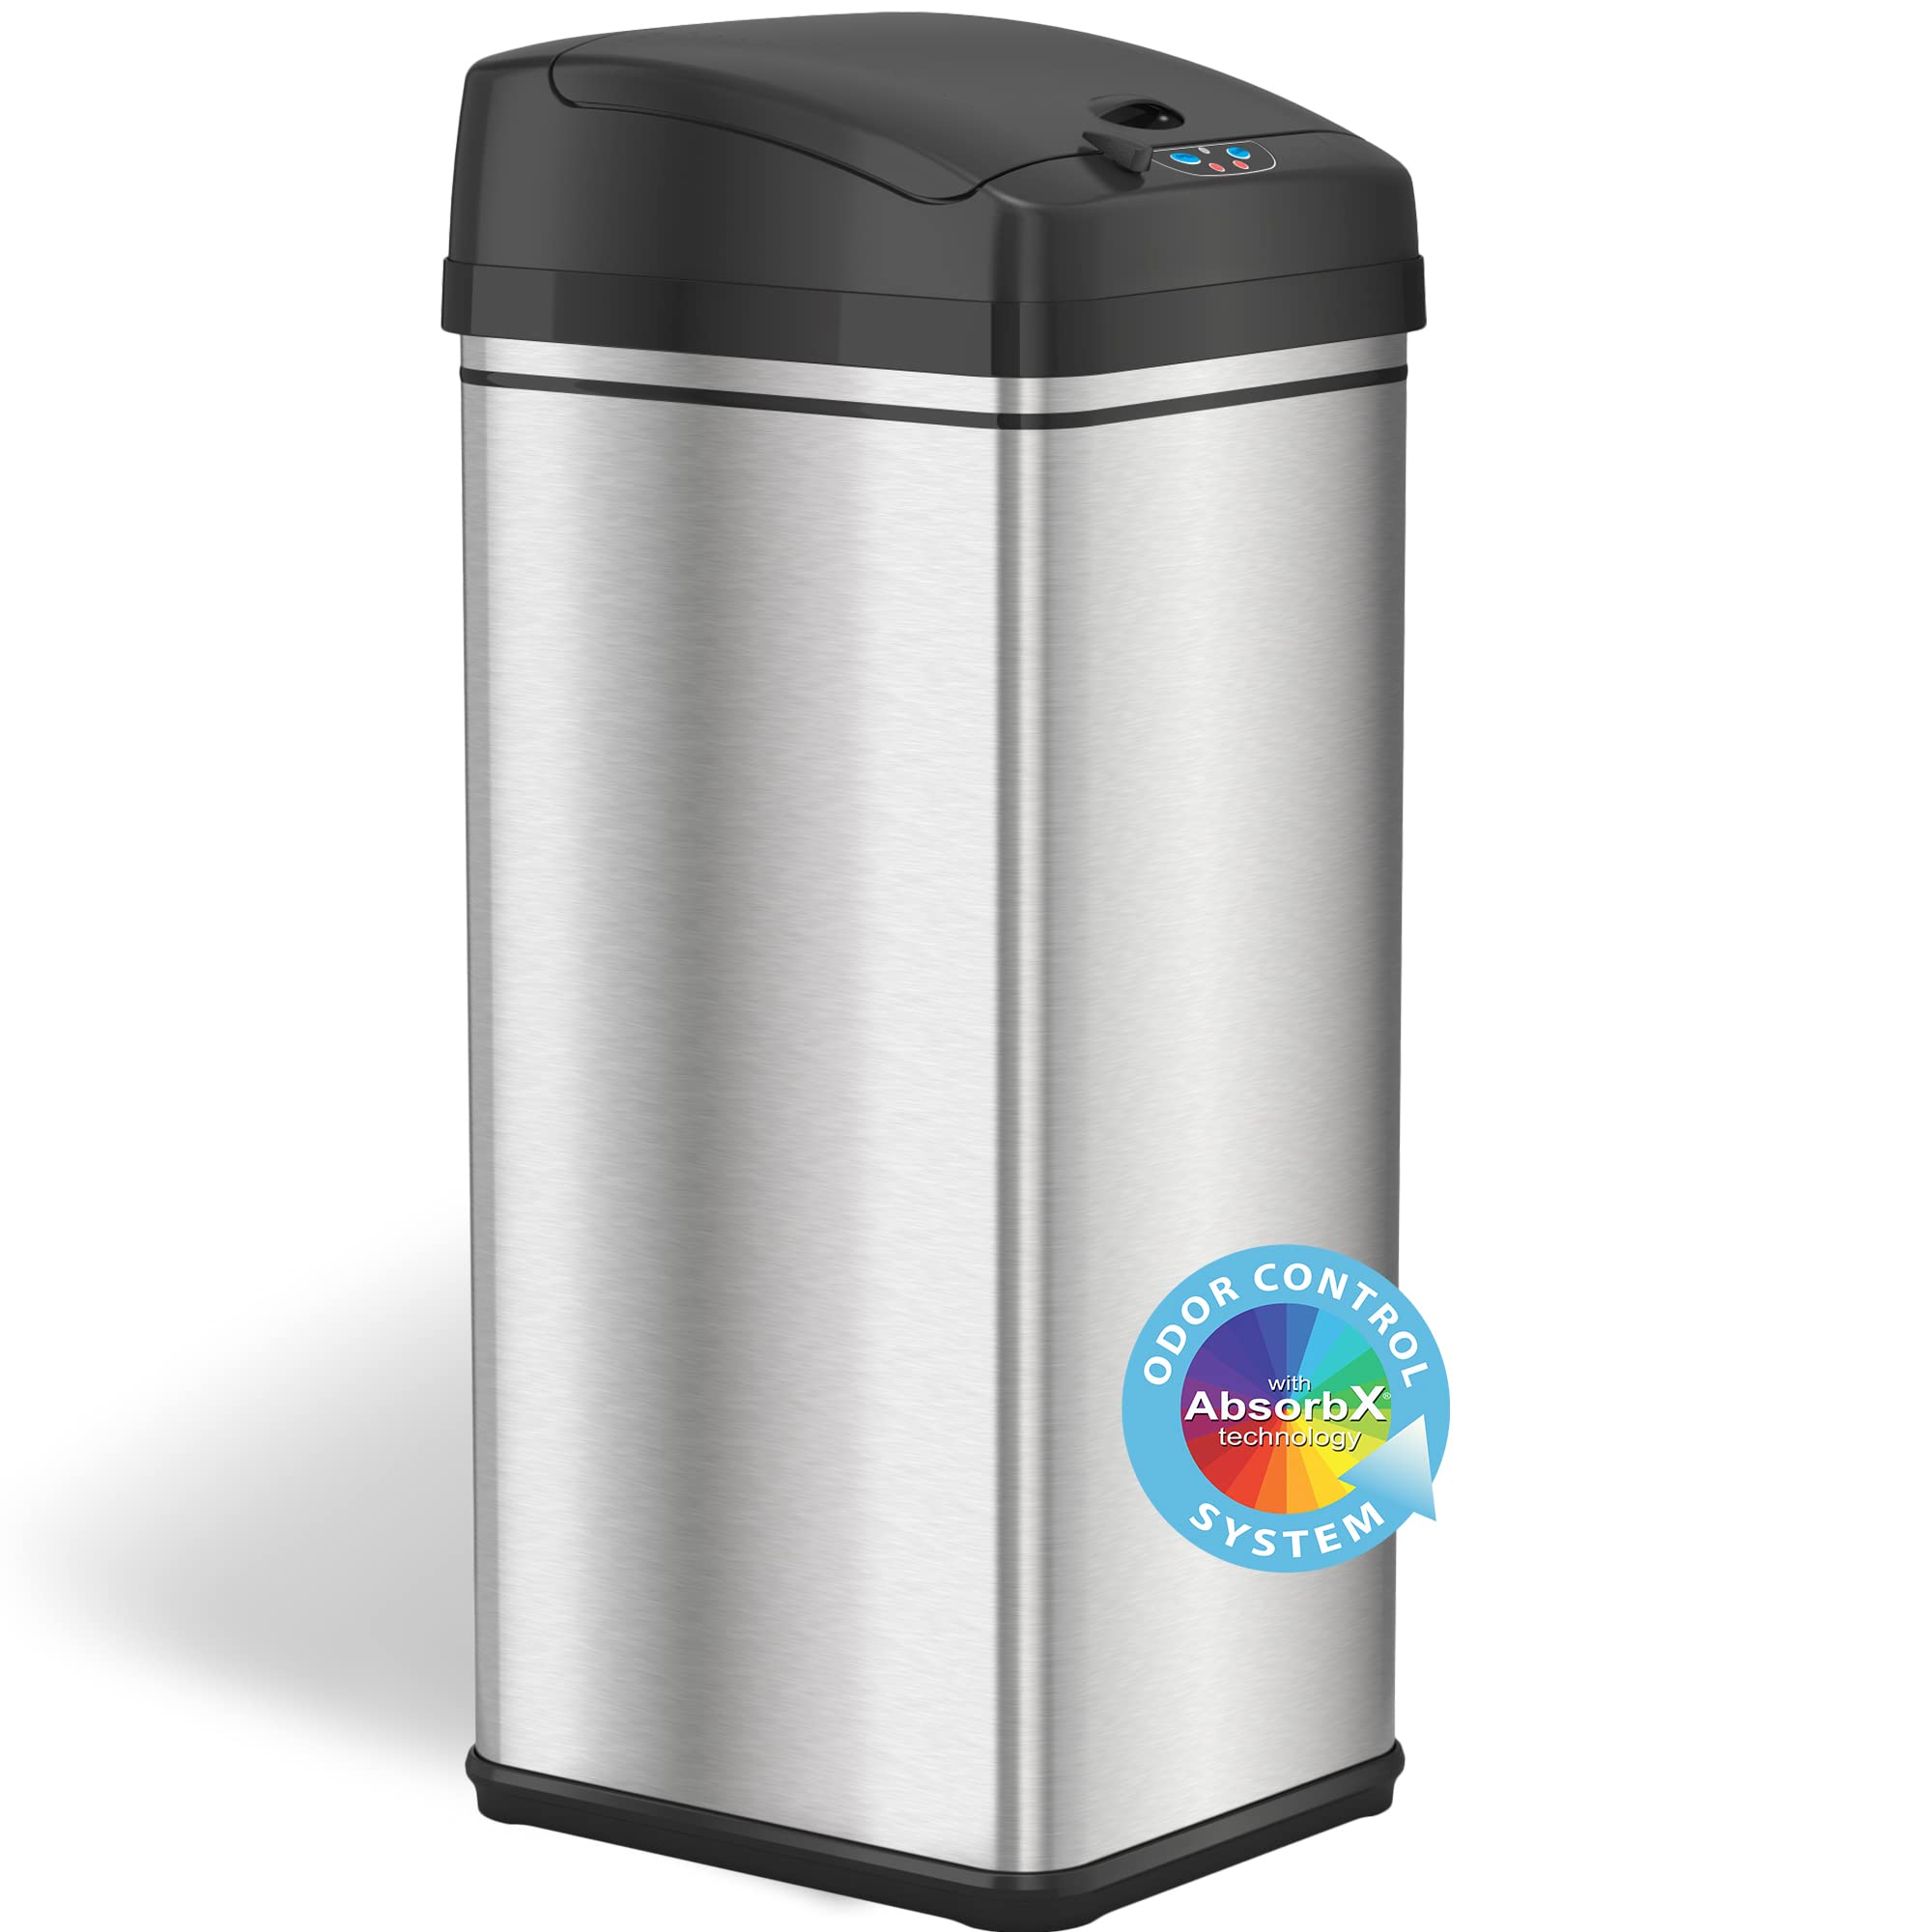 iTouchless 13 Gallon Stainless Steel Automatic Trash Can with Odor-Absorbing Filter and Lid Lock